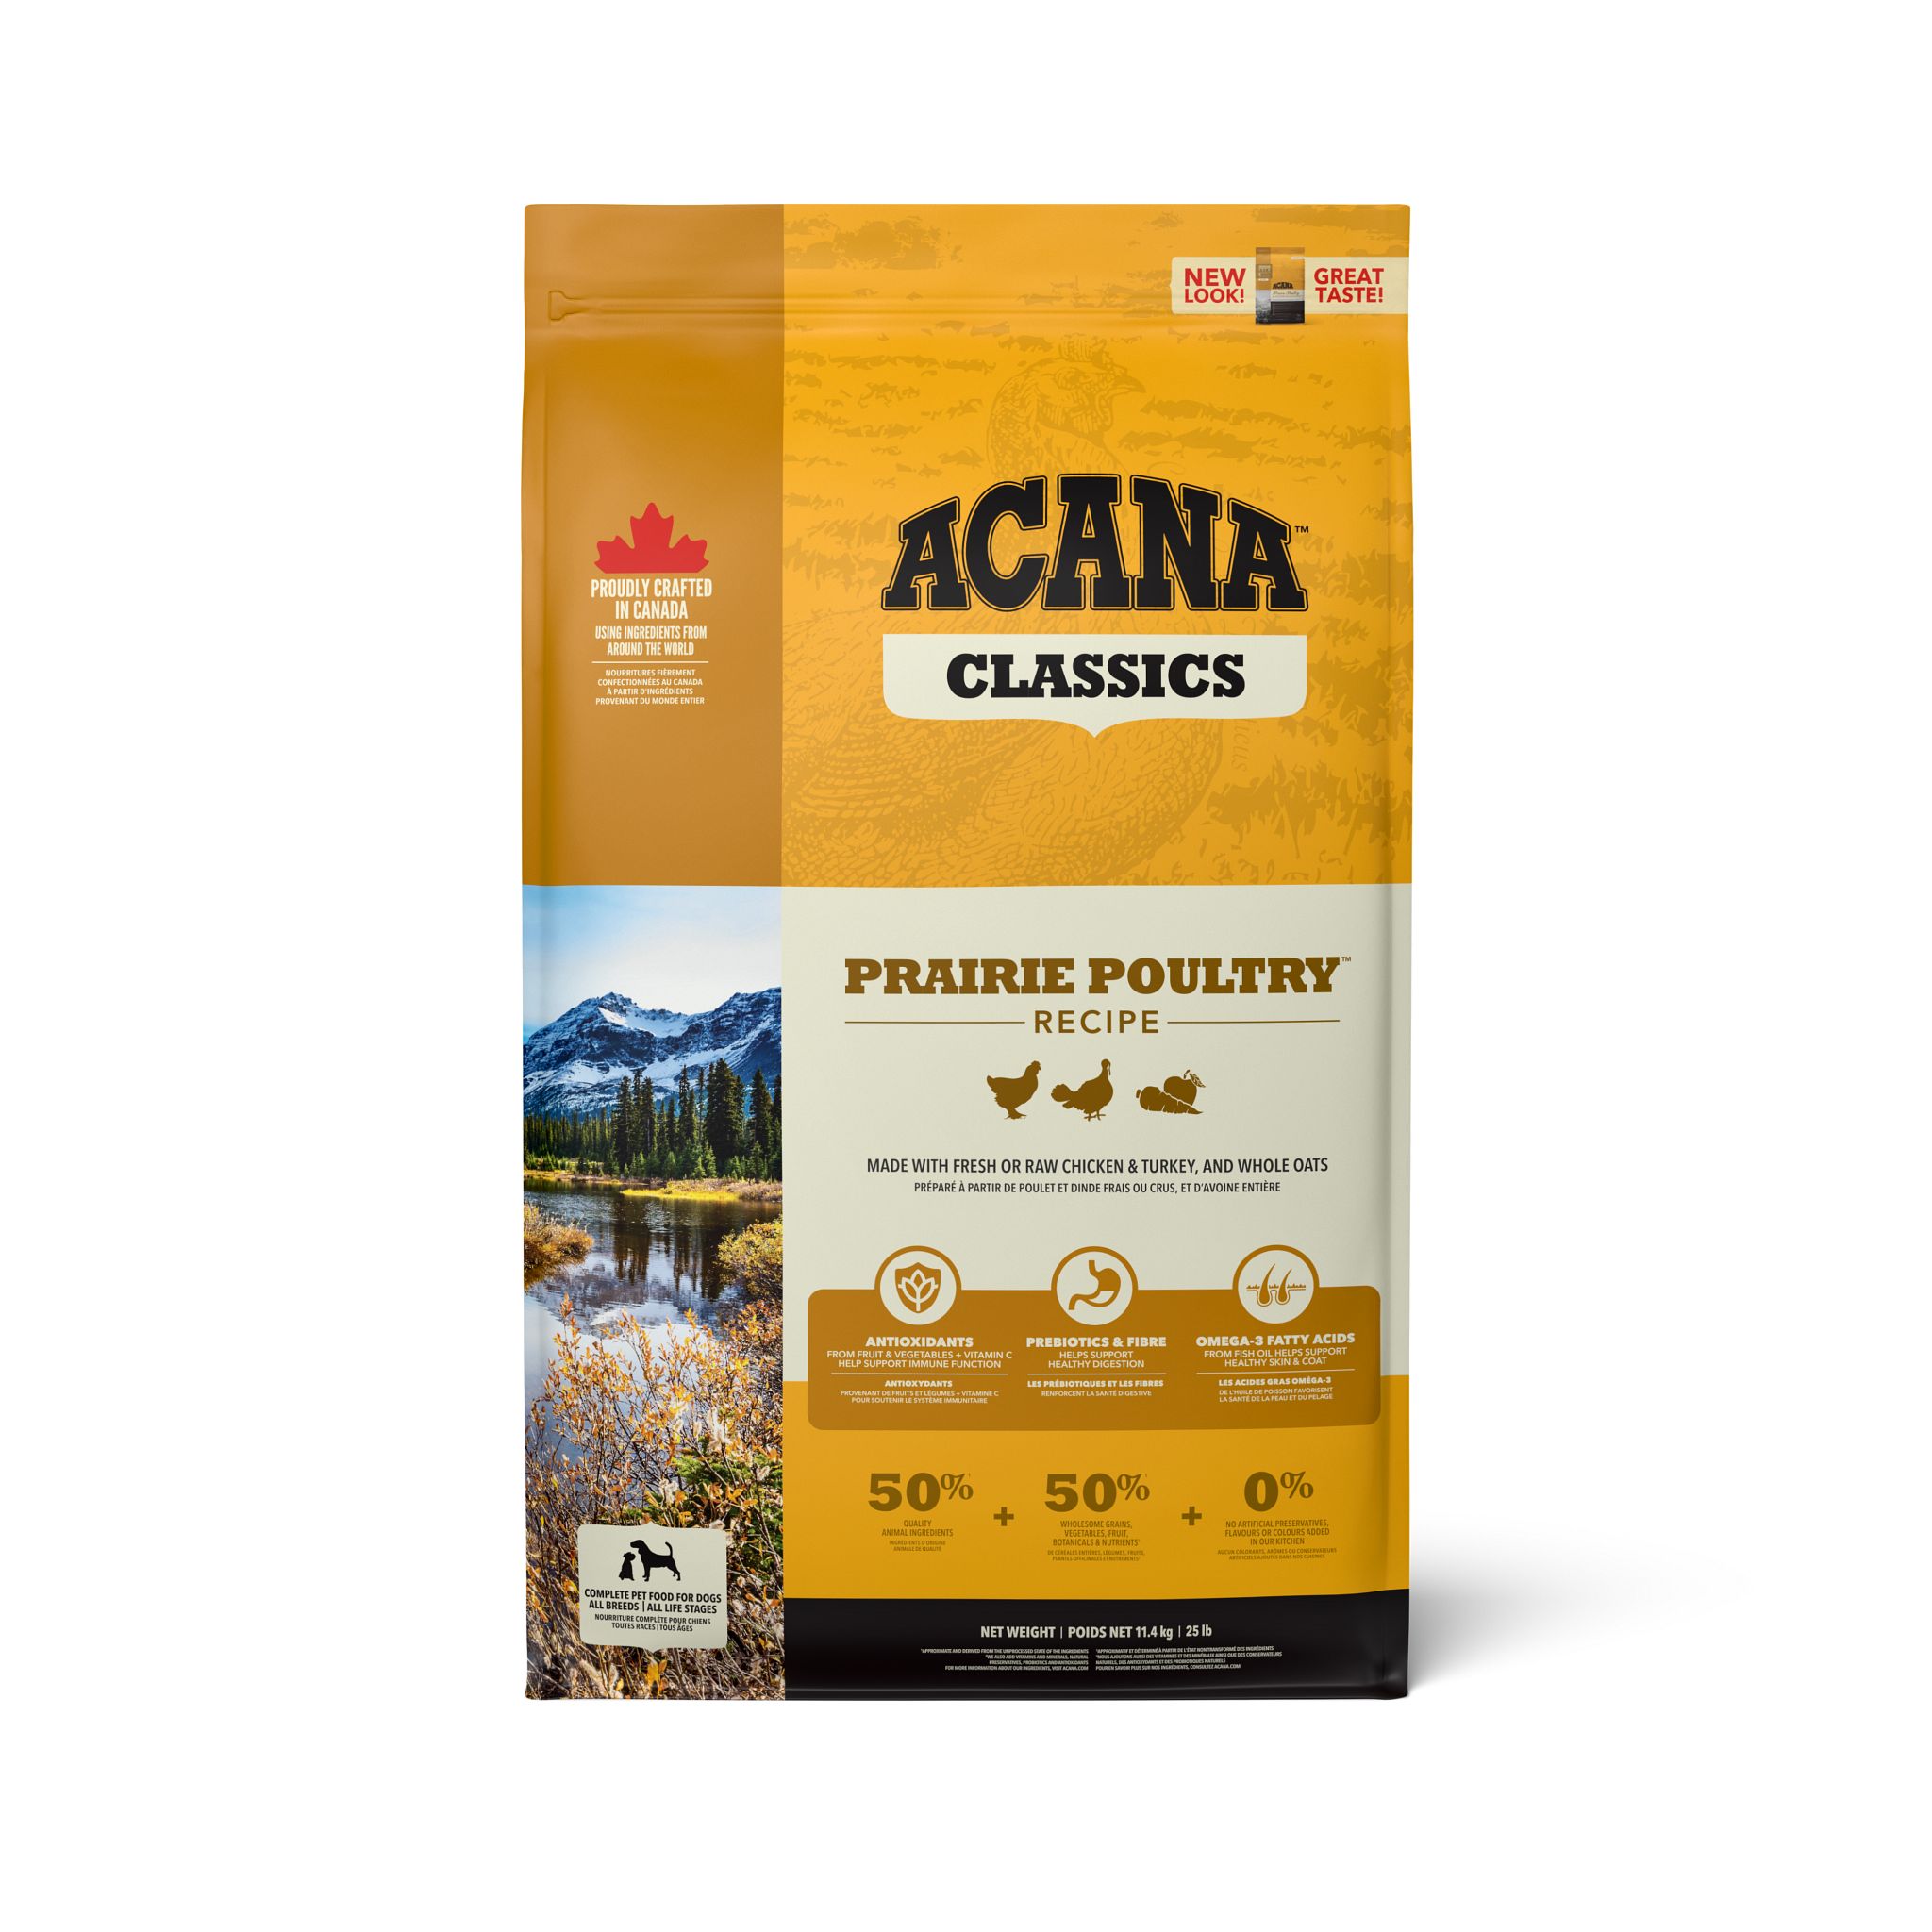 ACANA Classics Prairie Poultry Recipe 11.4 kg (Front Package)